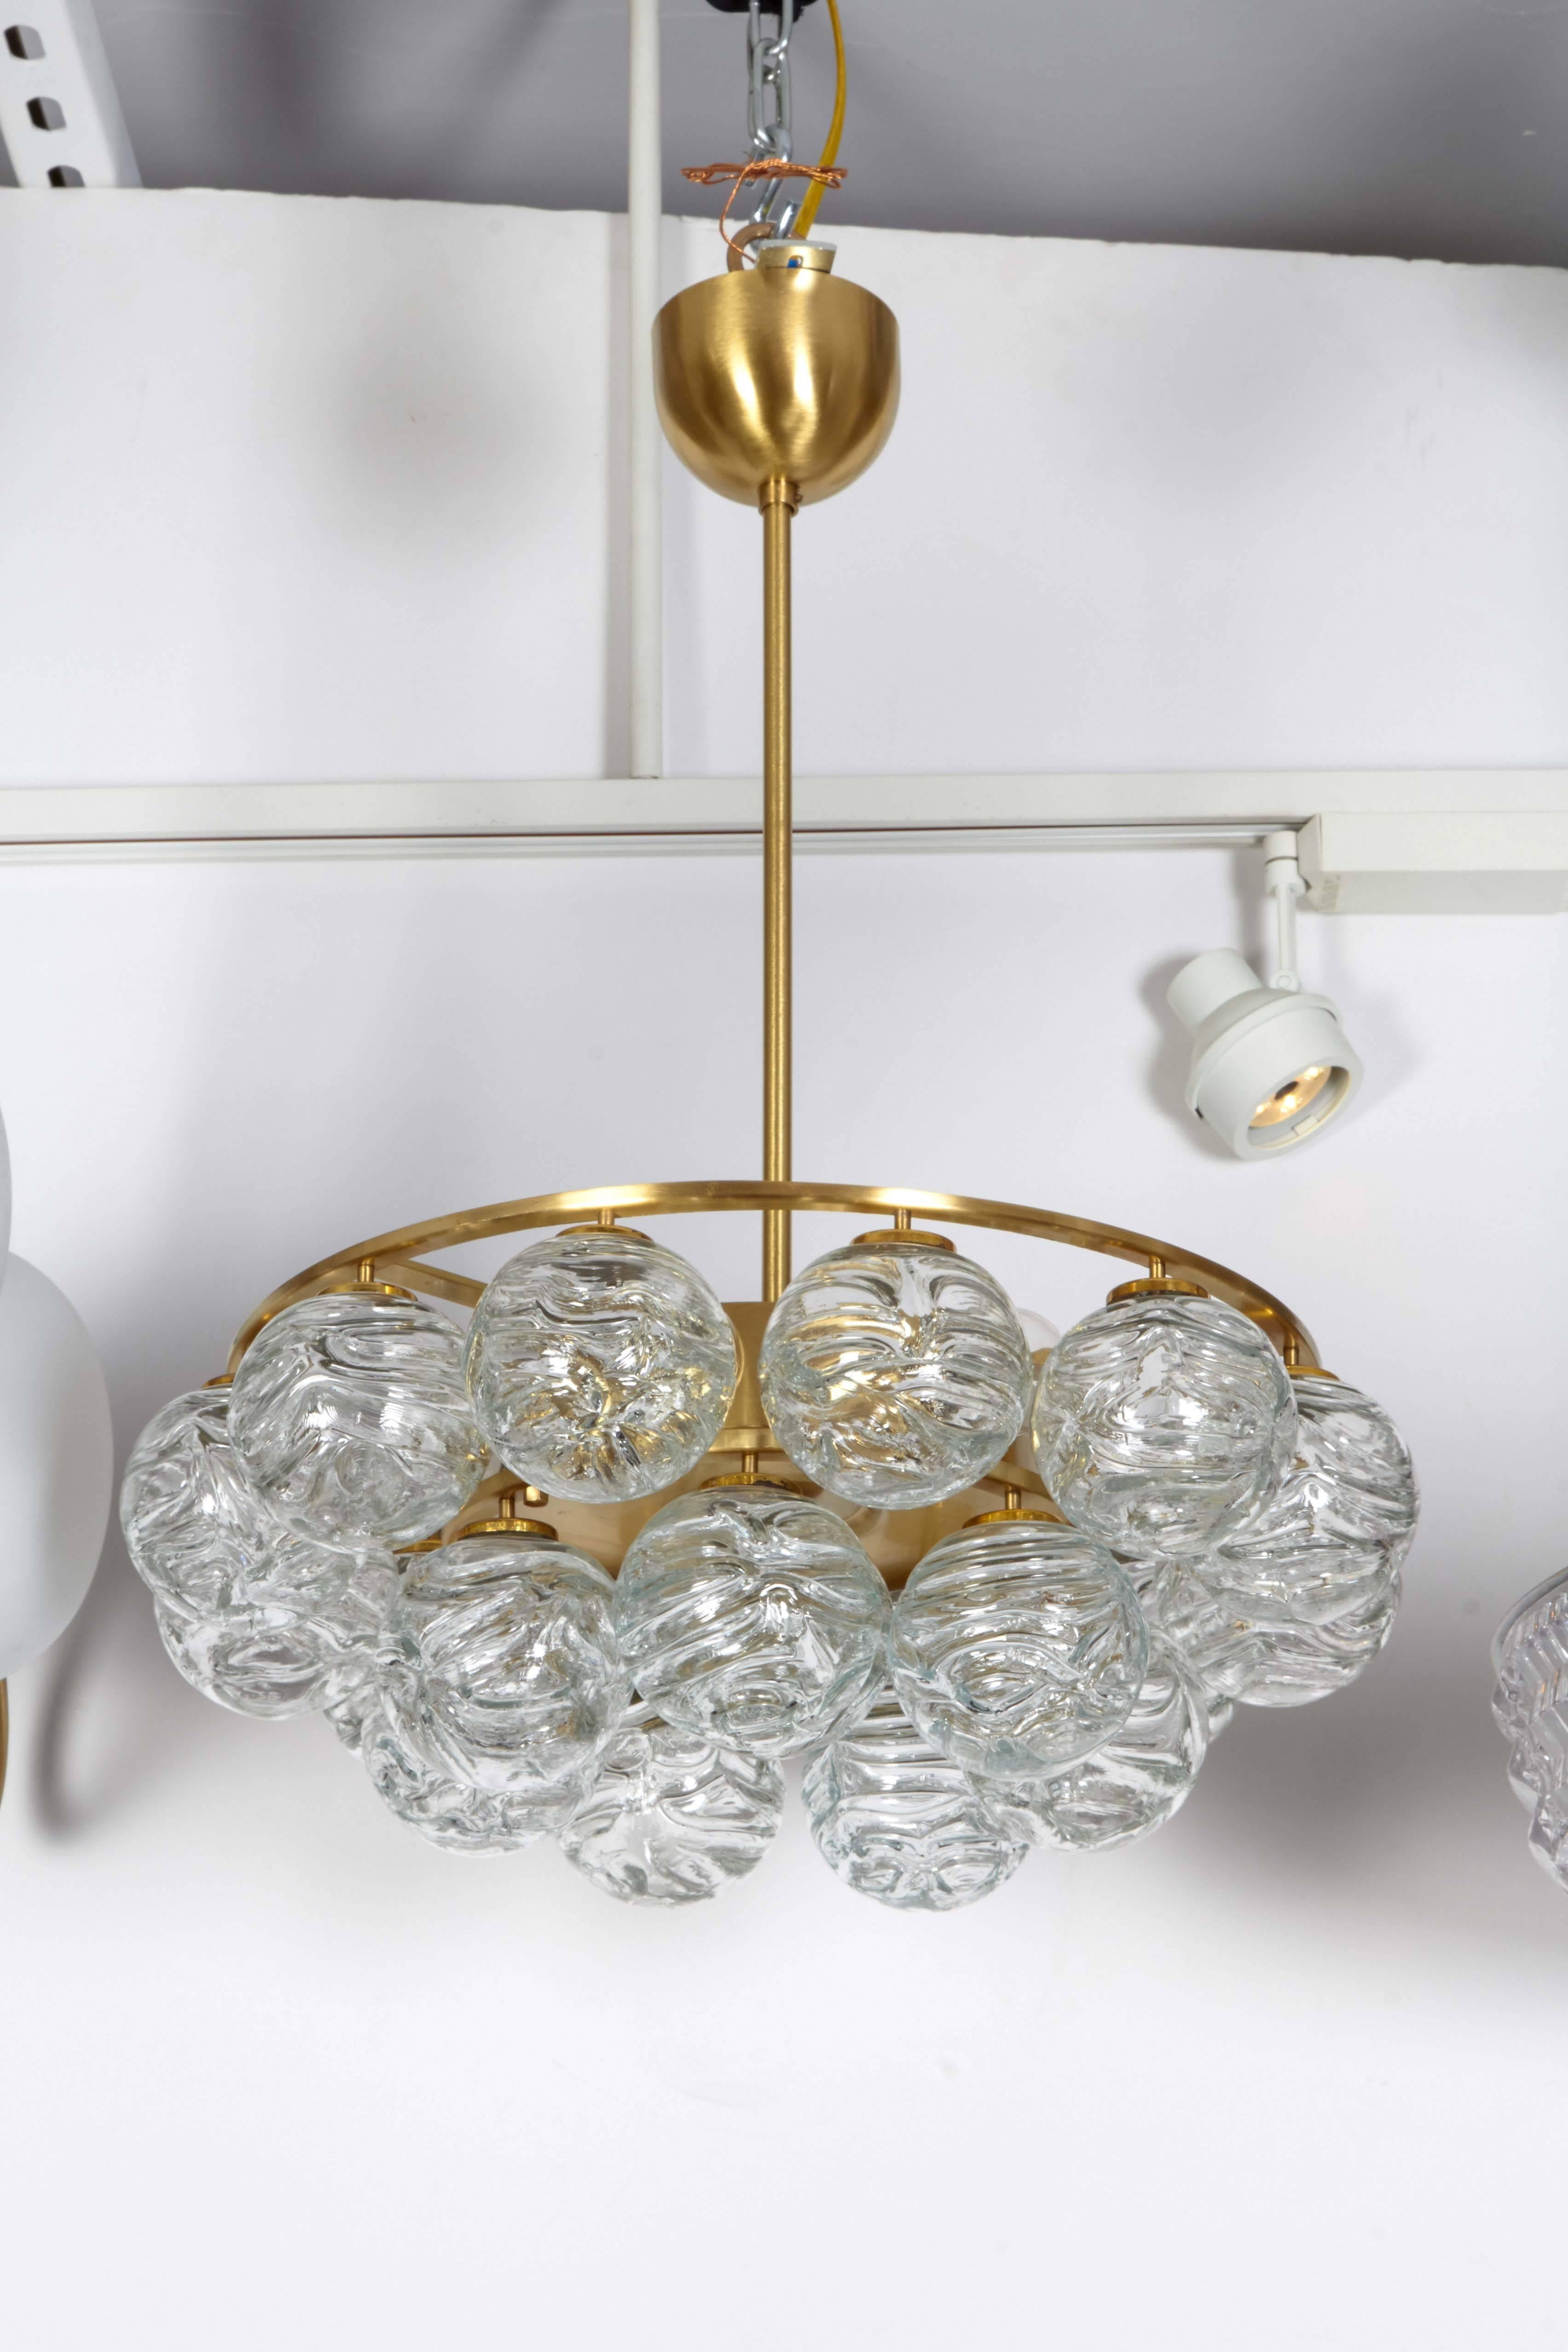 Striking Mid-Century pendant chandelier with two rows of suspended ice glass spheres and one in center, all on a satin brass frame. Uses six chandelier type bulbs, 40W max each. Rewired for use in the USA.